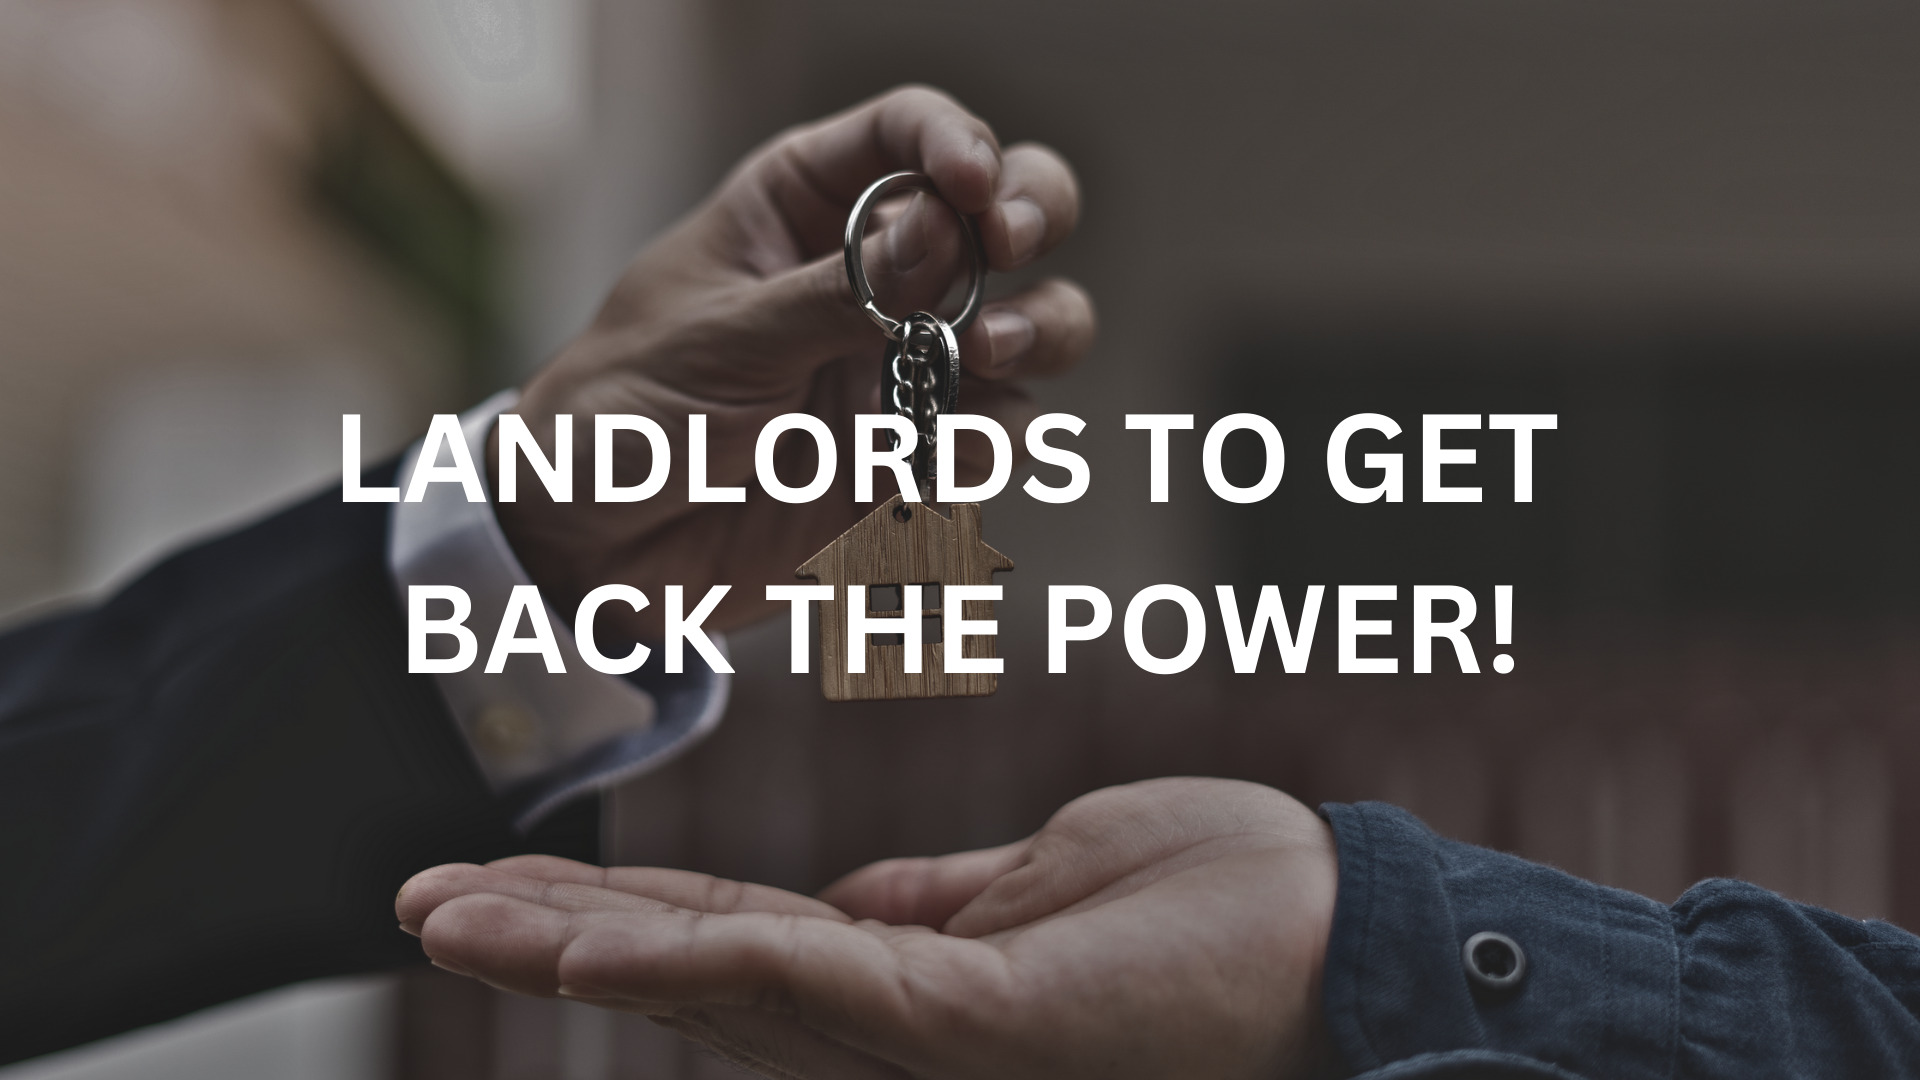 Landlords to get back the power!